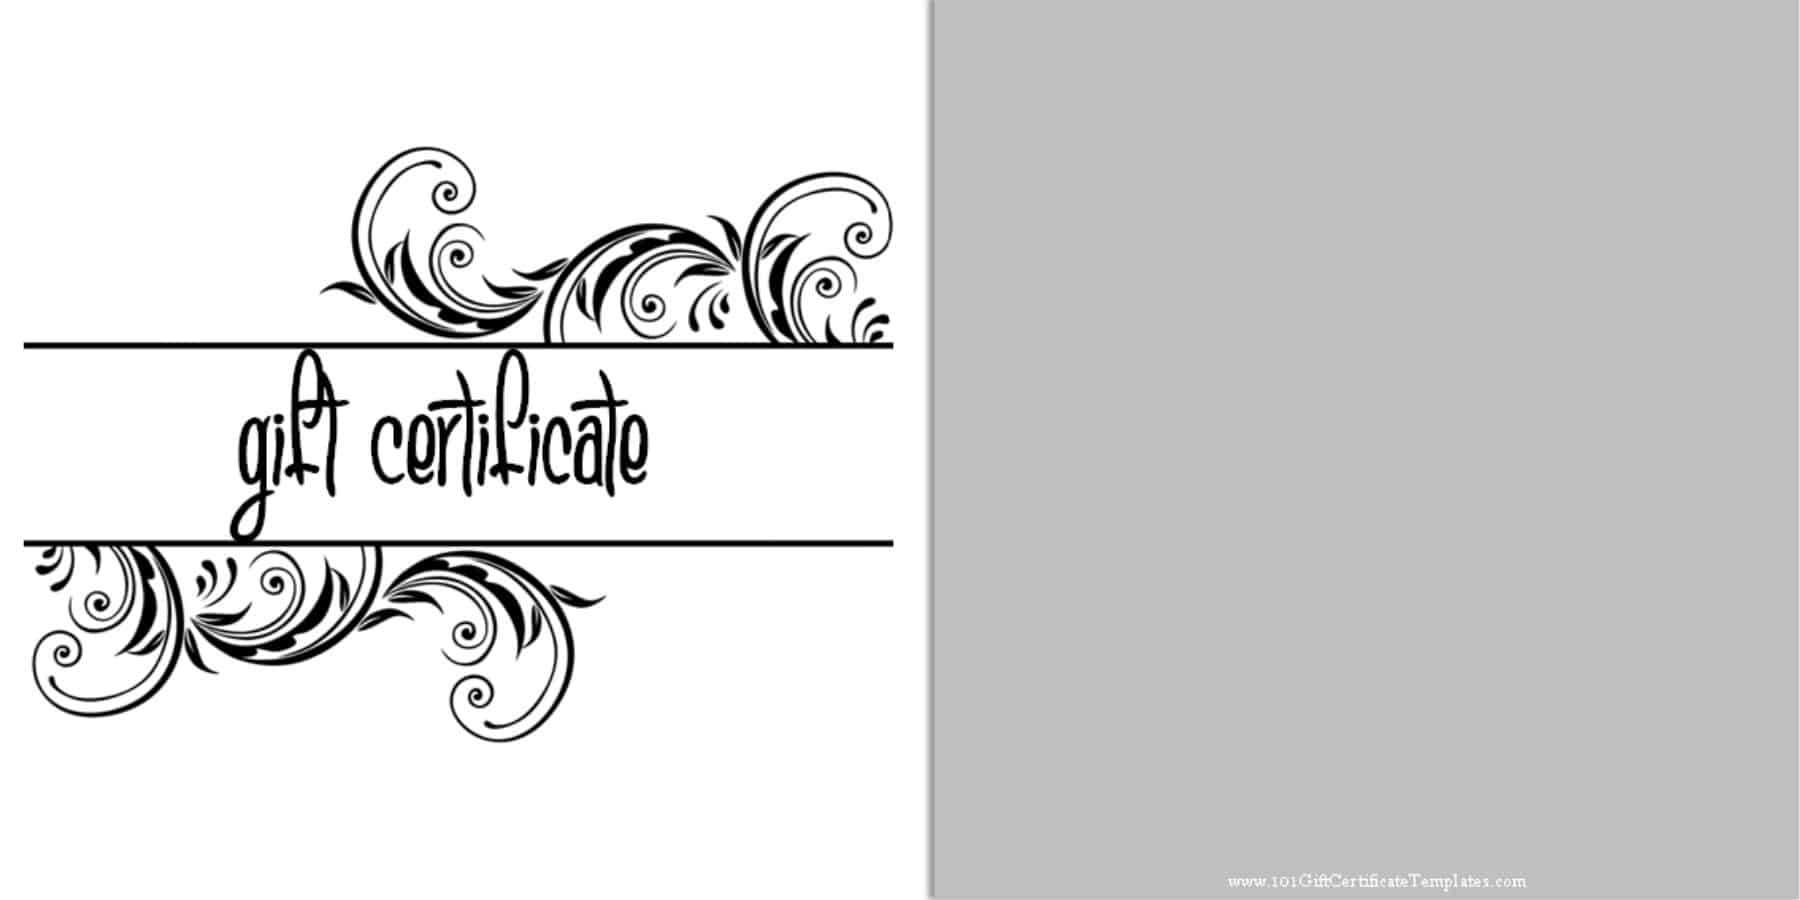 Printable Gift Certificate Templates For Black And White Gift Certificate Template Free